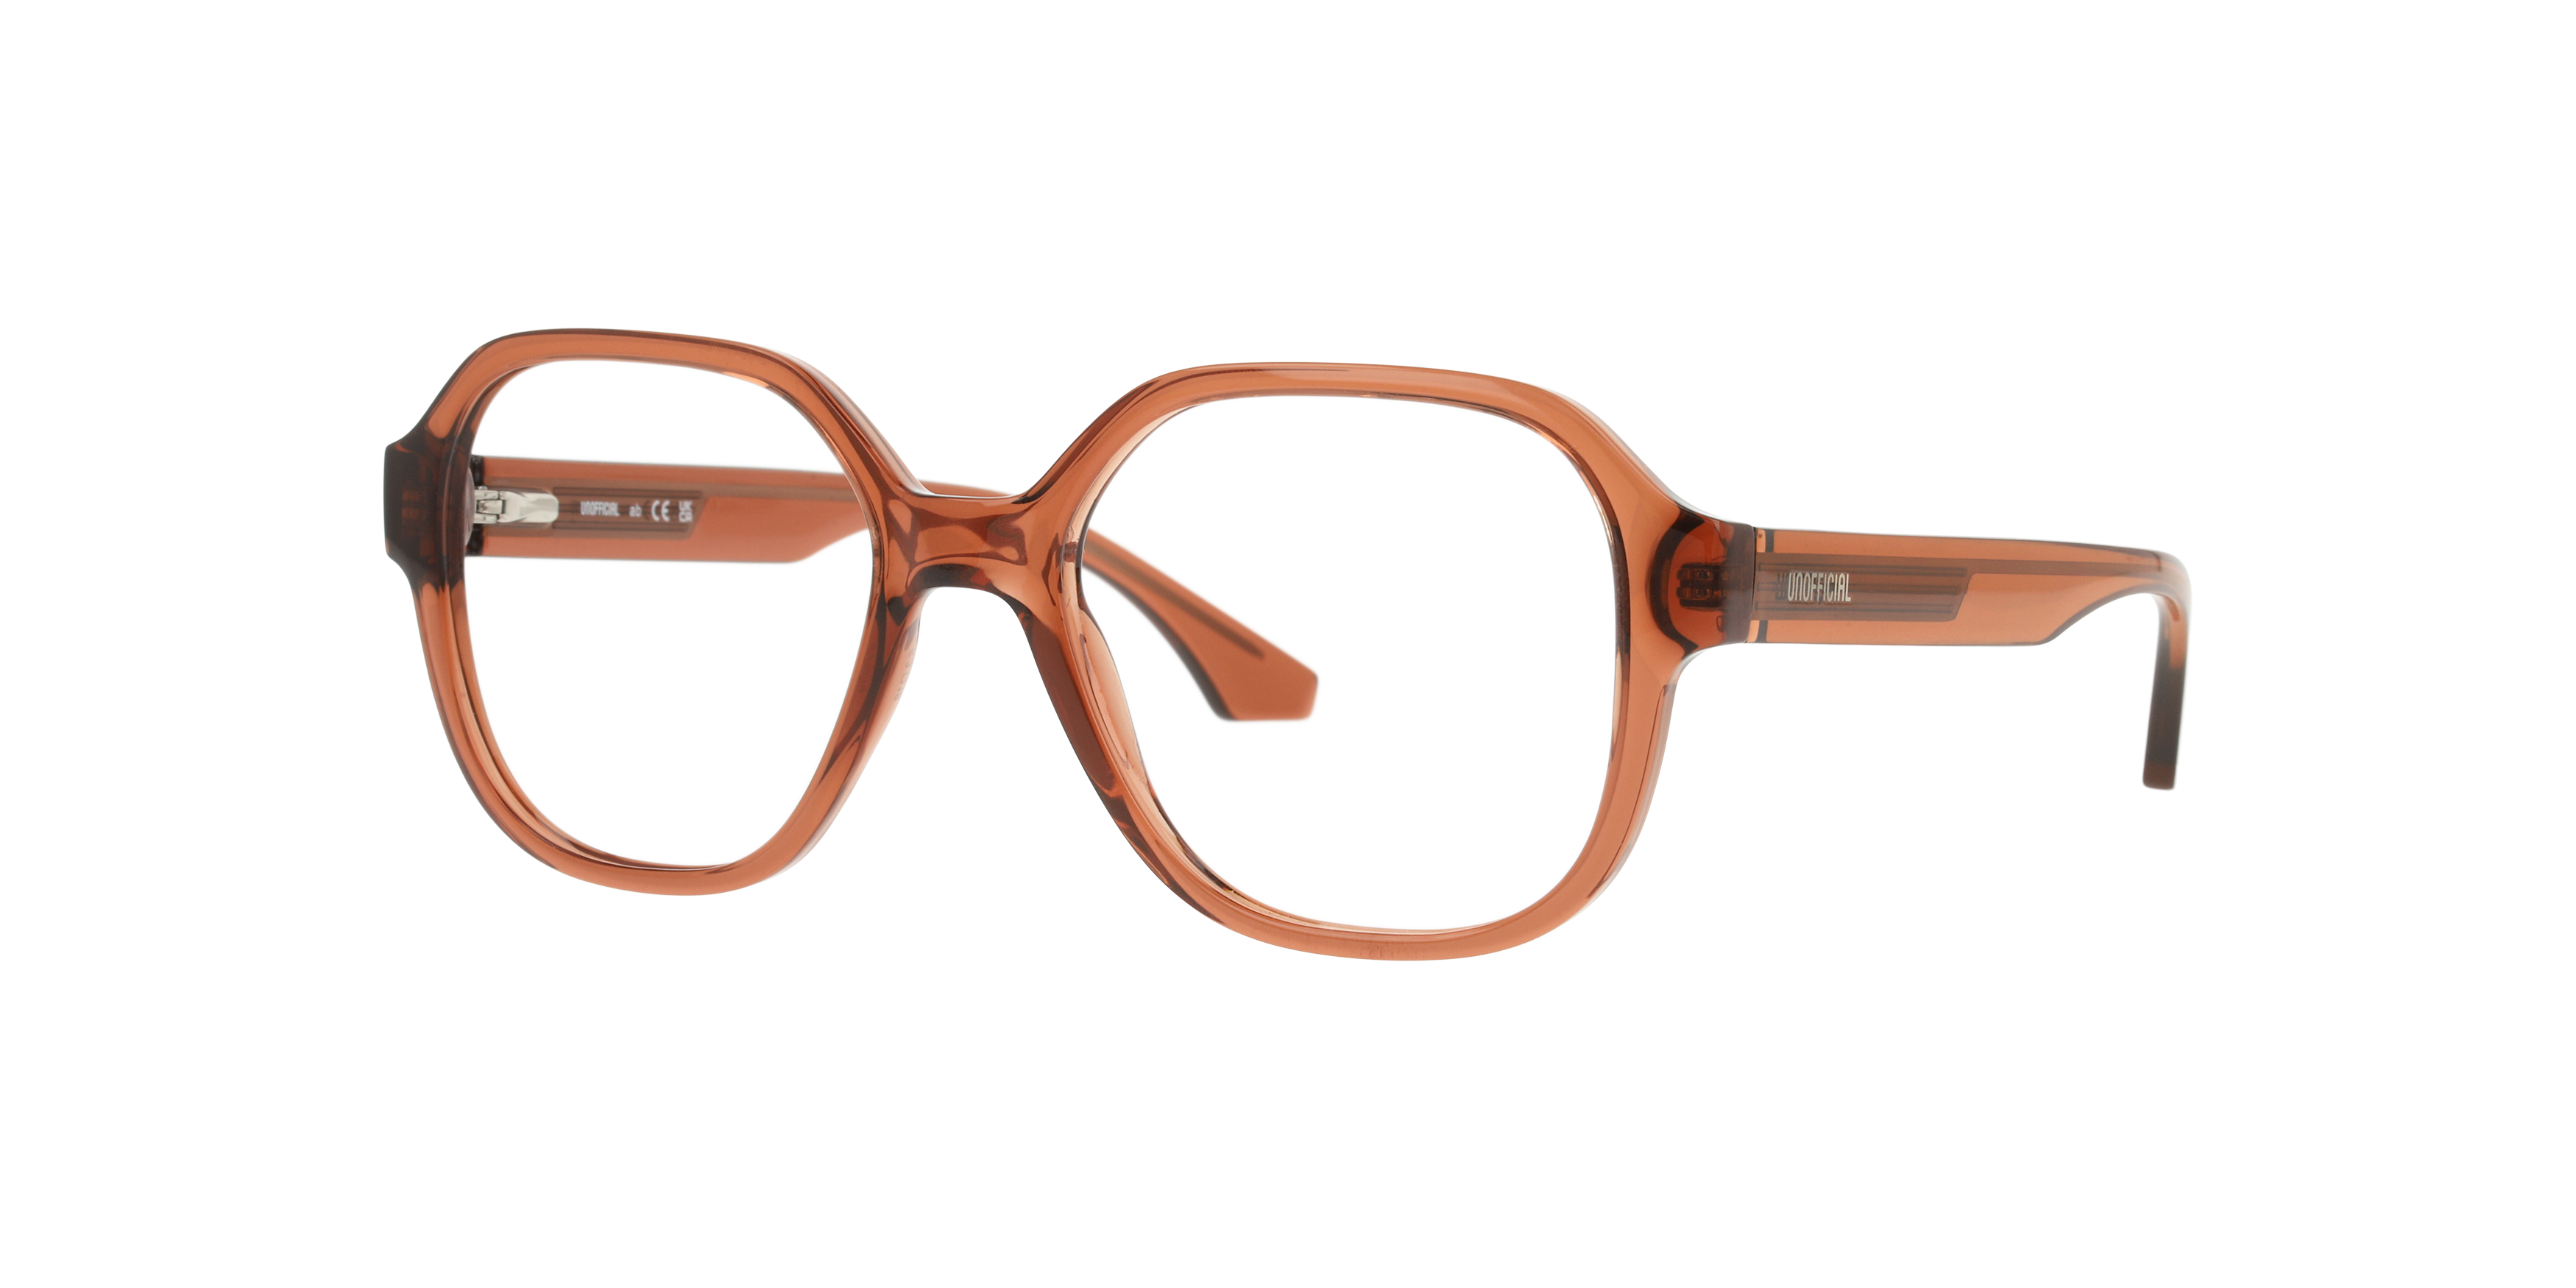 Angle_Left01 Unofficial UO3045 Glasses Transparent / Transparent, Brown